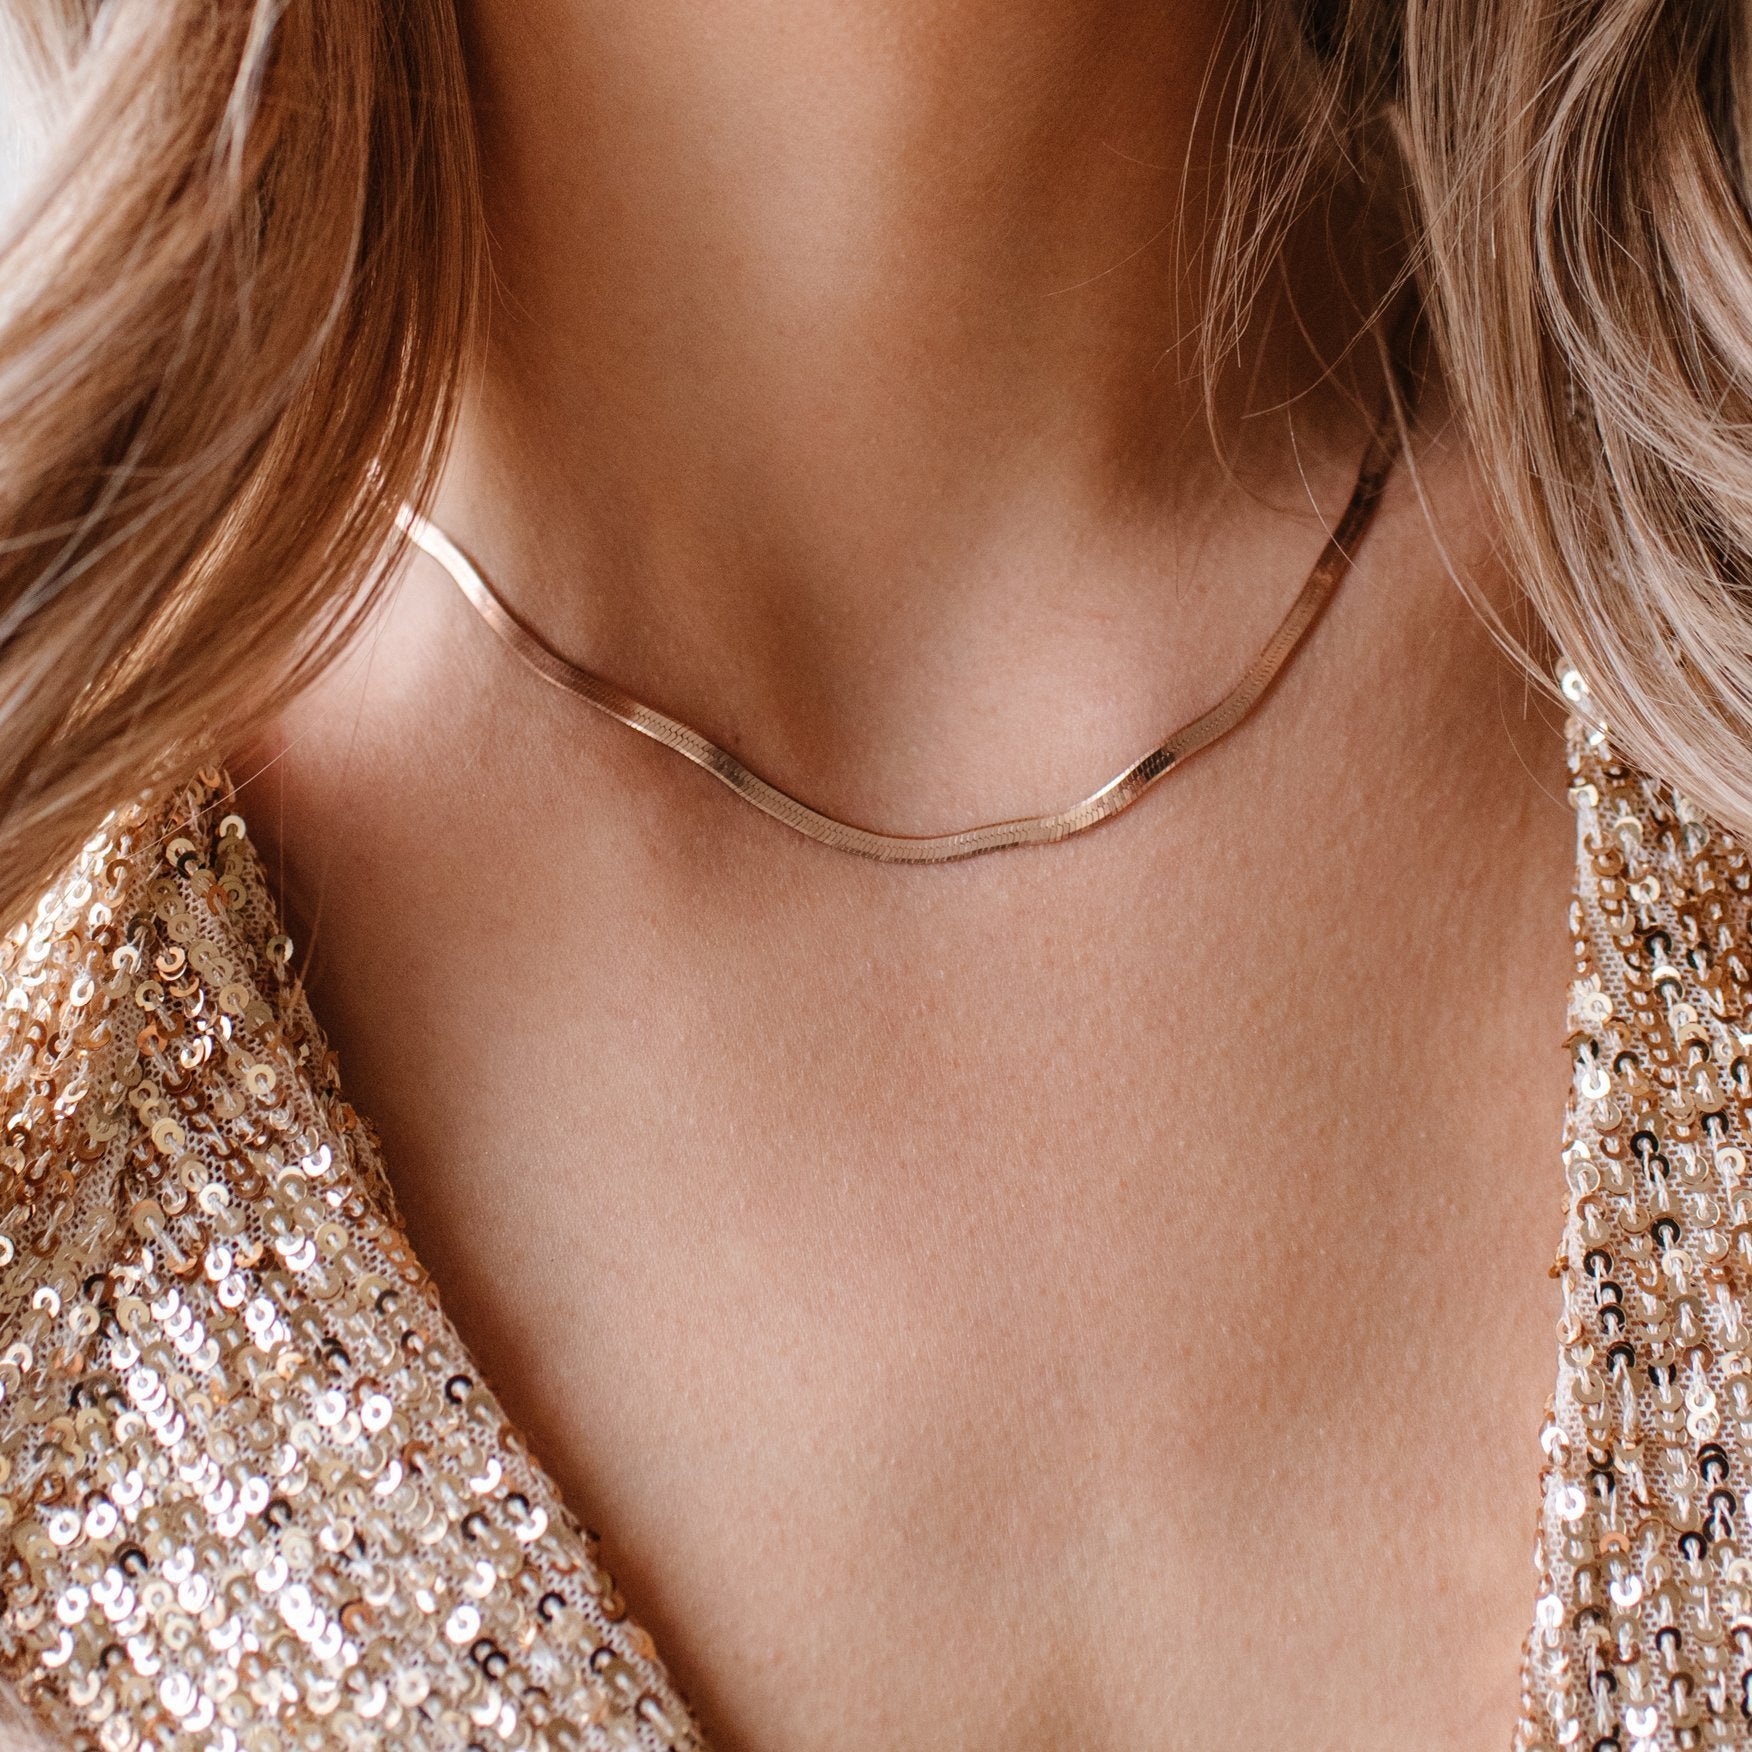 CHARMING HERRINGBONE CHAIN 14.5 - 16" NECKLACE ROSE GOLD - SO PRETTY CARA COTTER